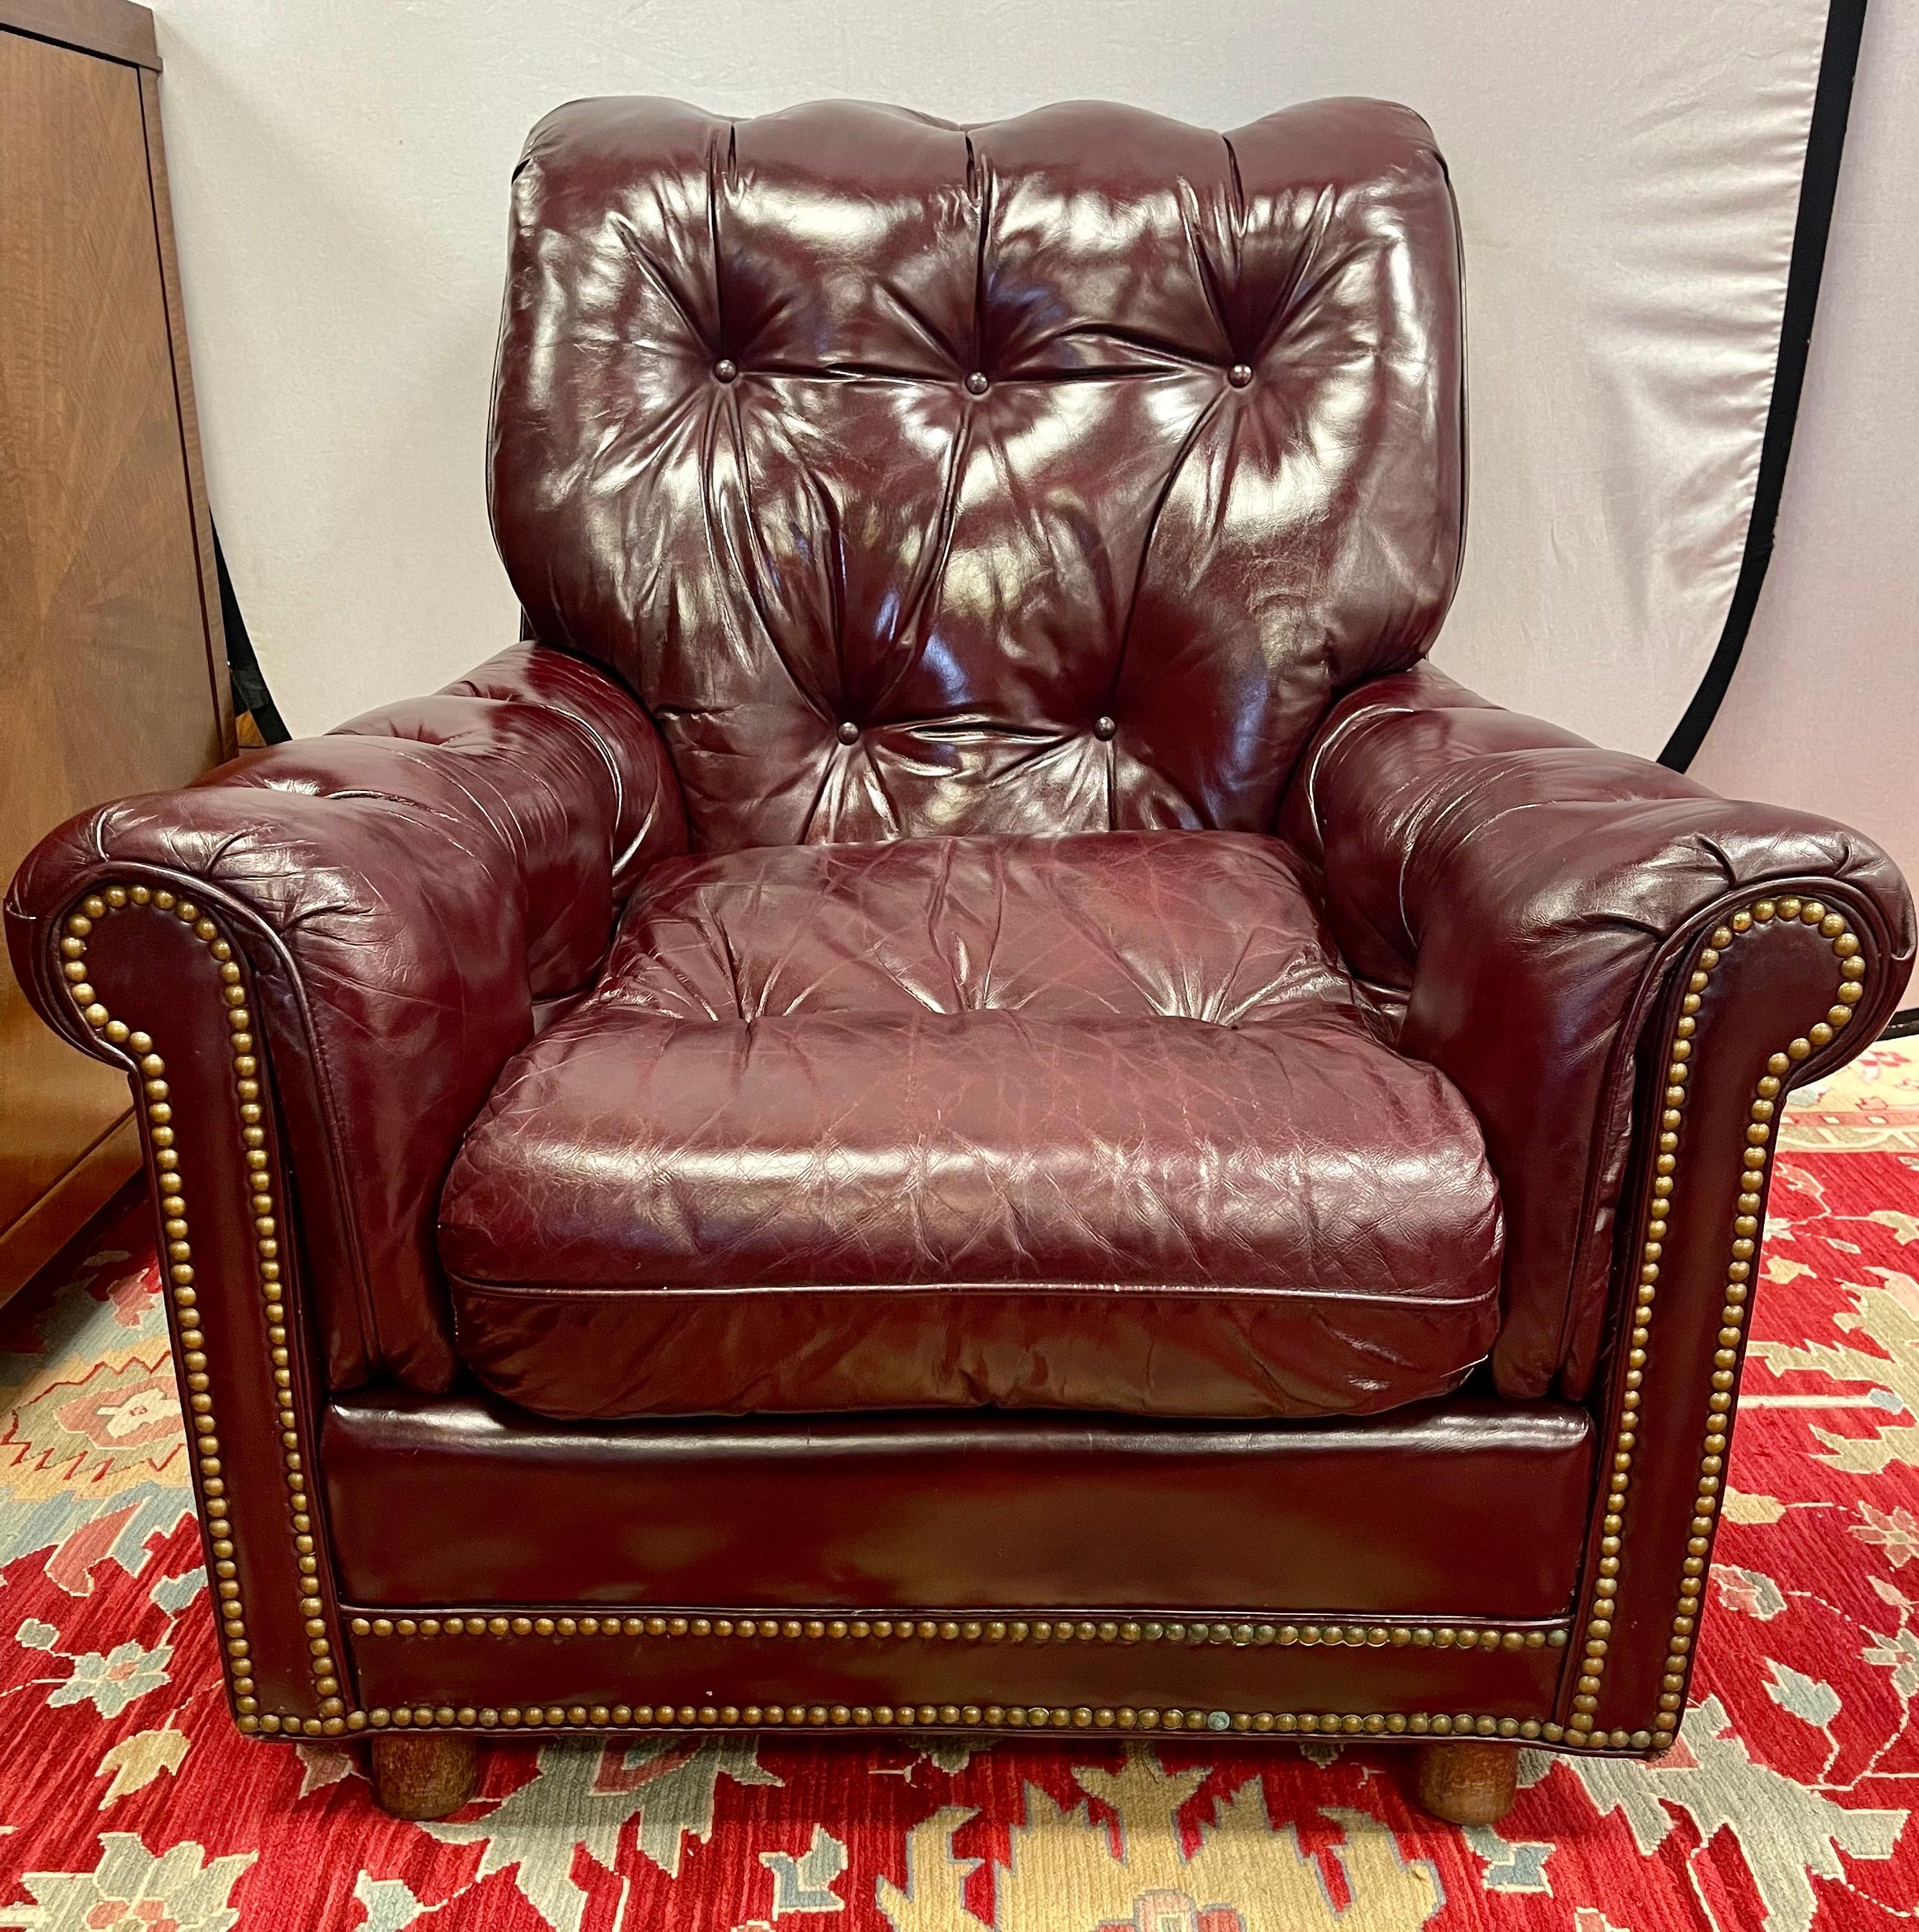 Vintage signed Hancock & Moore cranberry leather wing chair with nailheads throughout and a perfectly broken in patina to the leather. Will be one of your most comfortable chairs. Why not own the best.